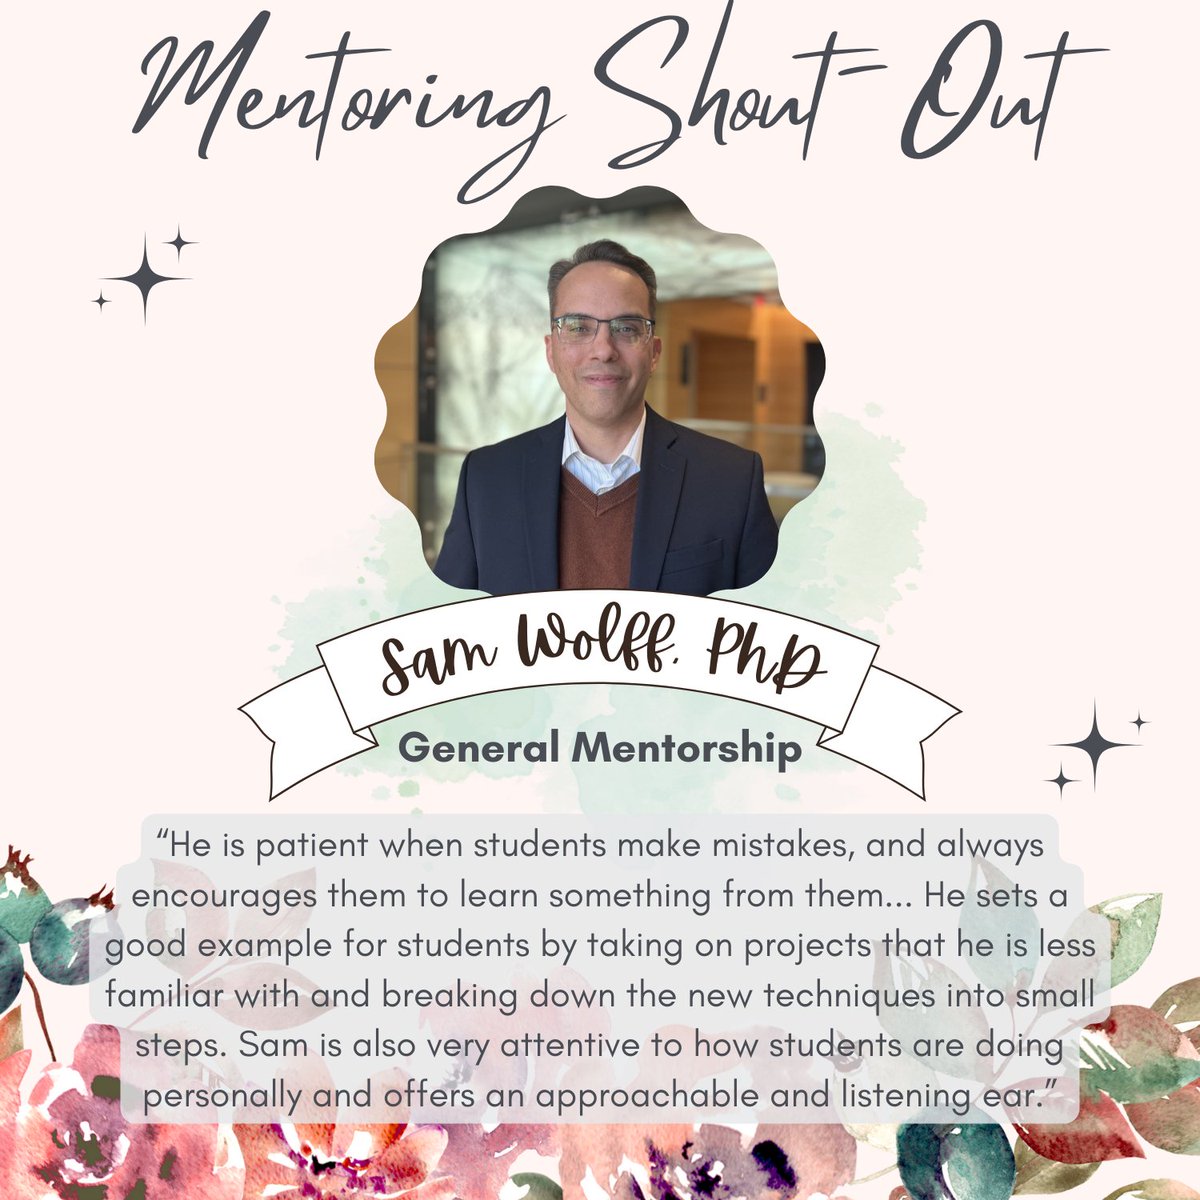 The last mentoring shout-out of the year goes to Sam Wolff, PhD. An alum of @uncneuro, Dr. Wolff is an Assistant Professor in the @purvislab, @UNC_GMB, and the UNC Computational Medicine Program. Of his many skills, Dr. Wolff is a patient and encouraging mentor.